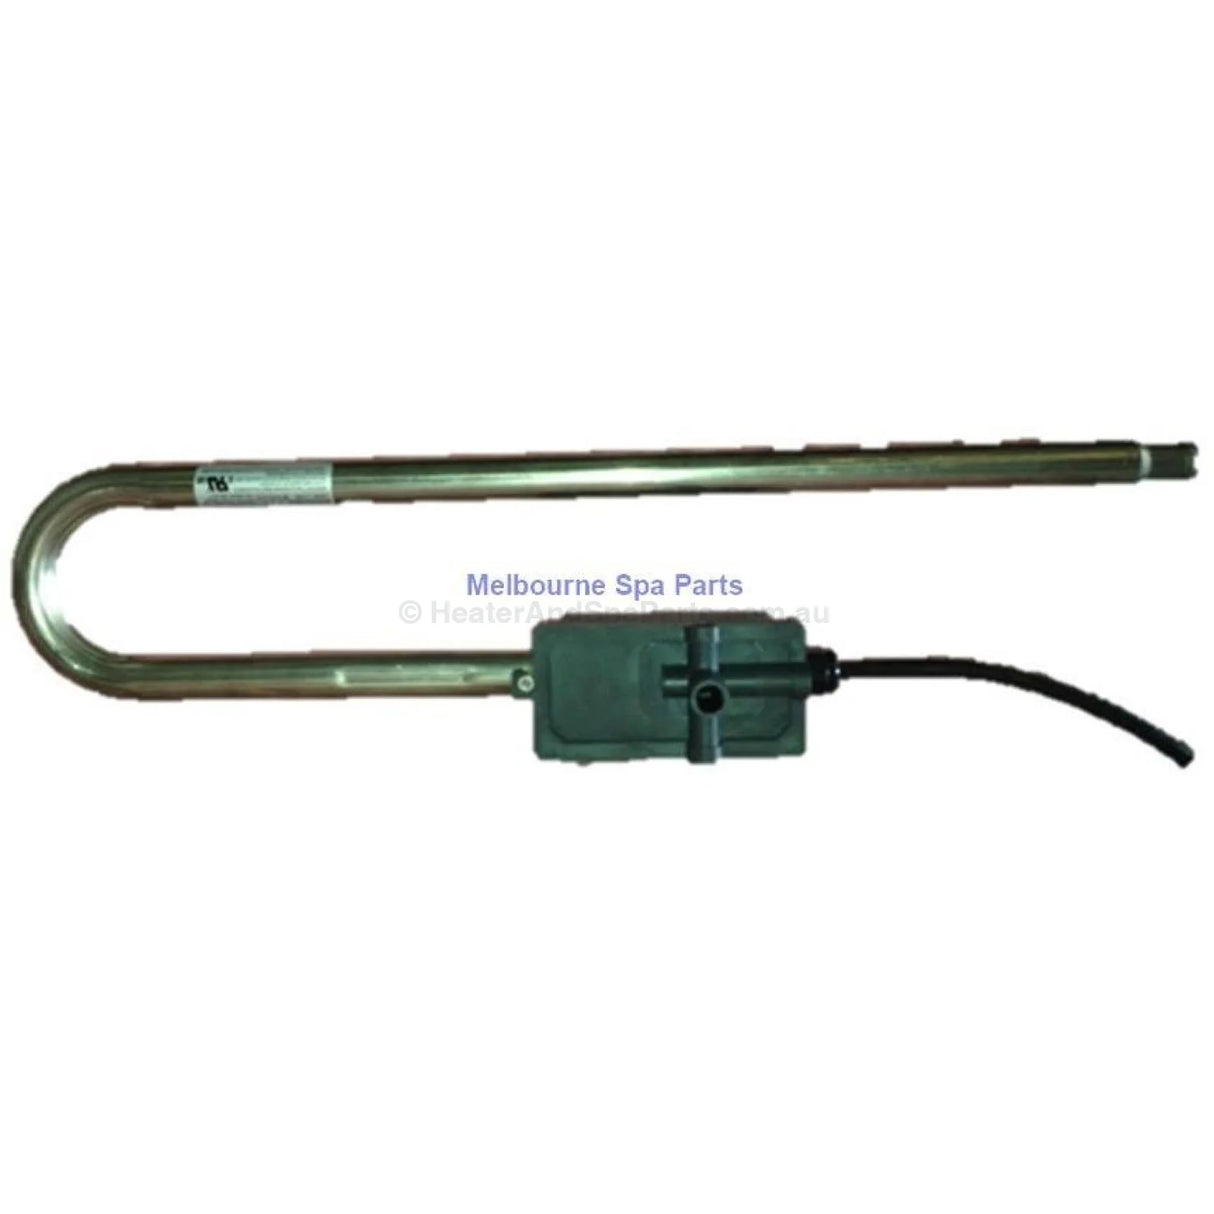 Laing Therm Gecko SSPA Laing Style (Trombone) Heater - 2.7kW - Infinity - Heater and Spa Parts